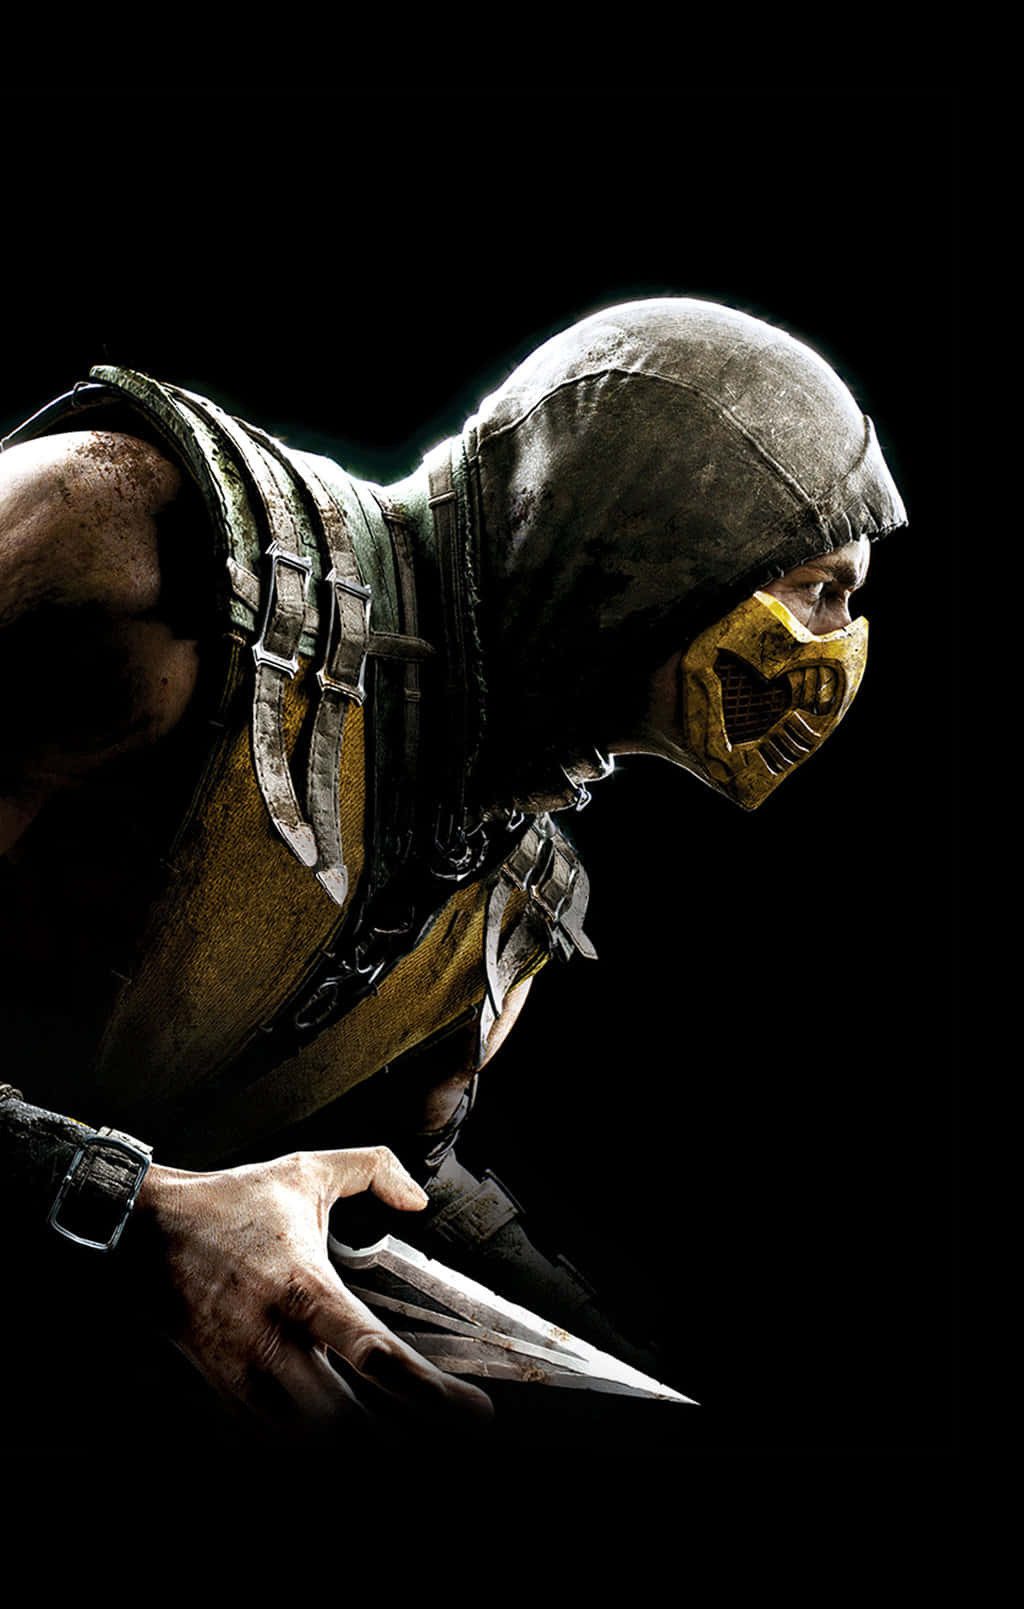 Take the legendary Mortal Kombat characters with you on the go with the special Mortal Kombat Iphone! Wallpaper